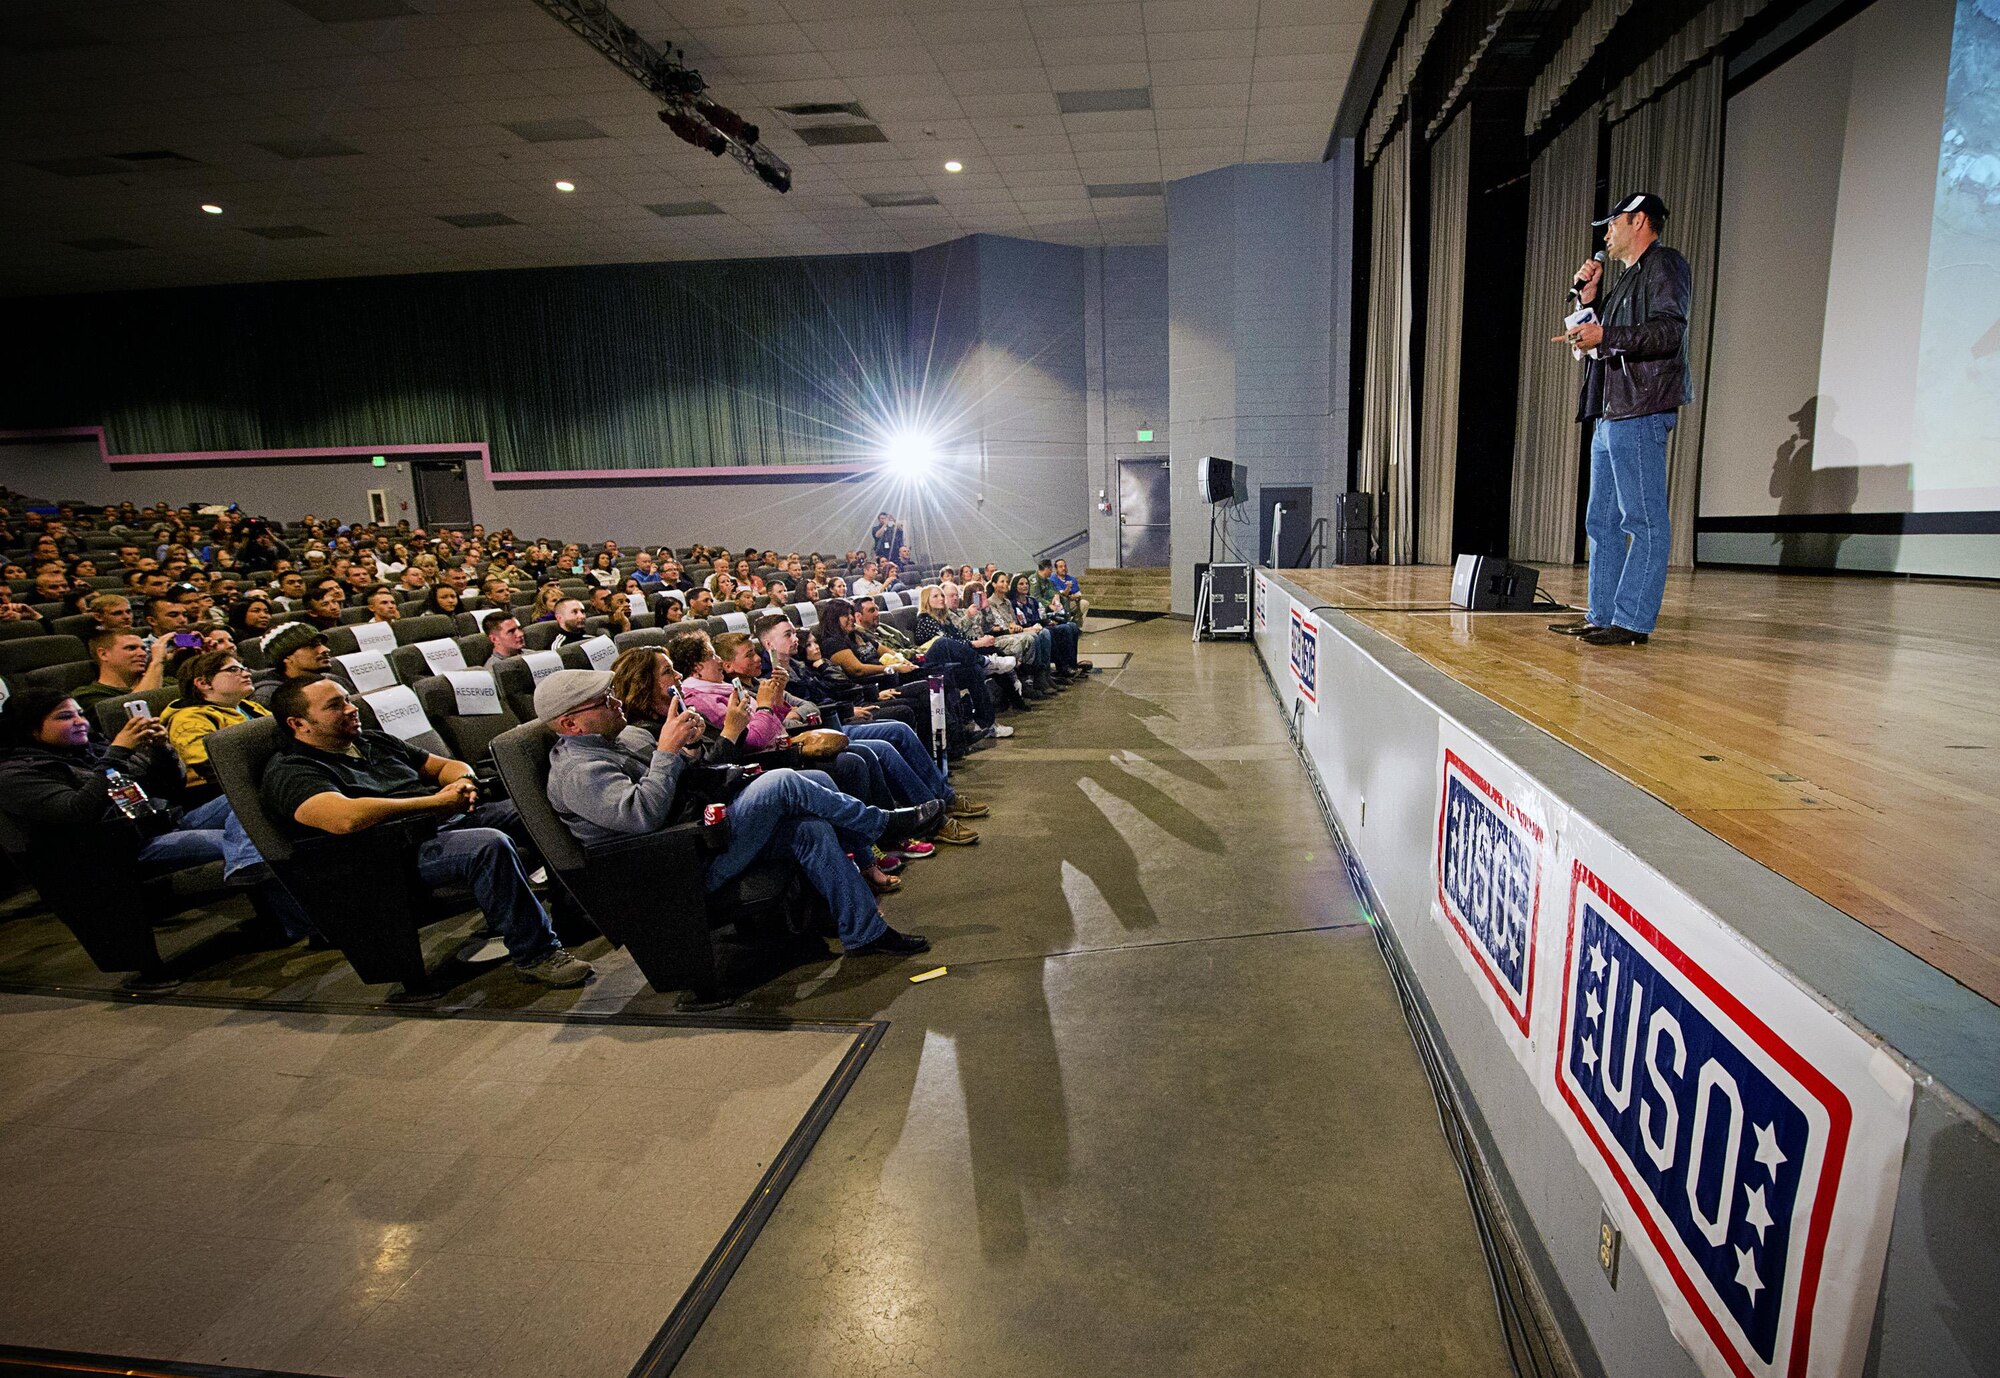 Actor Vince Vaughn talks to a packed audience before premiering his new film, “Unfinished Business,” Feb. 28, 2015, in the base theater at Edwards Air Force Base, Calif. Vaughn treated troops and their families to an advance screening of the film as part of his third USO visit. (USO photo/Dave Gatley)